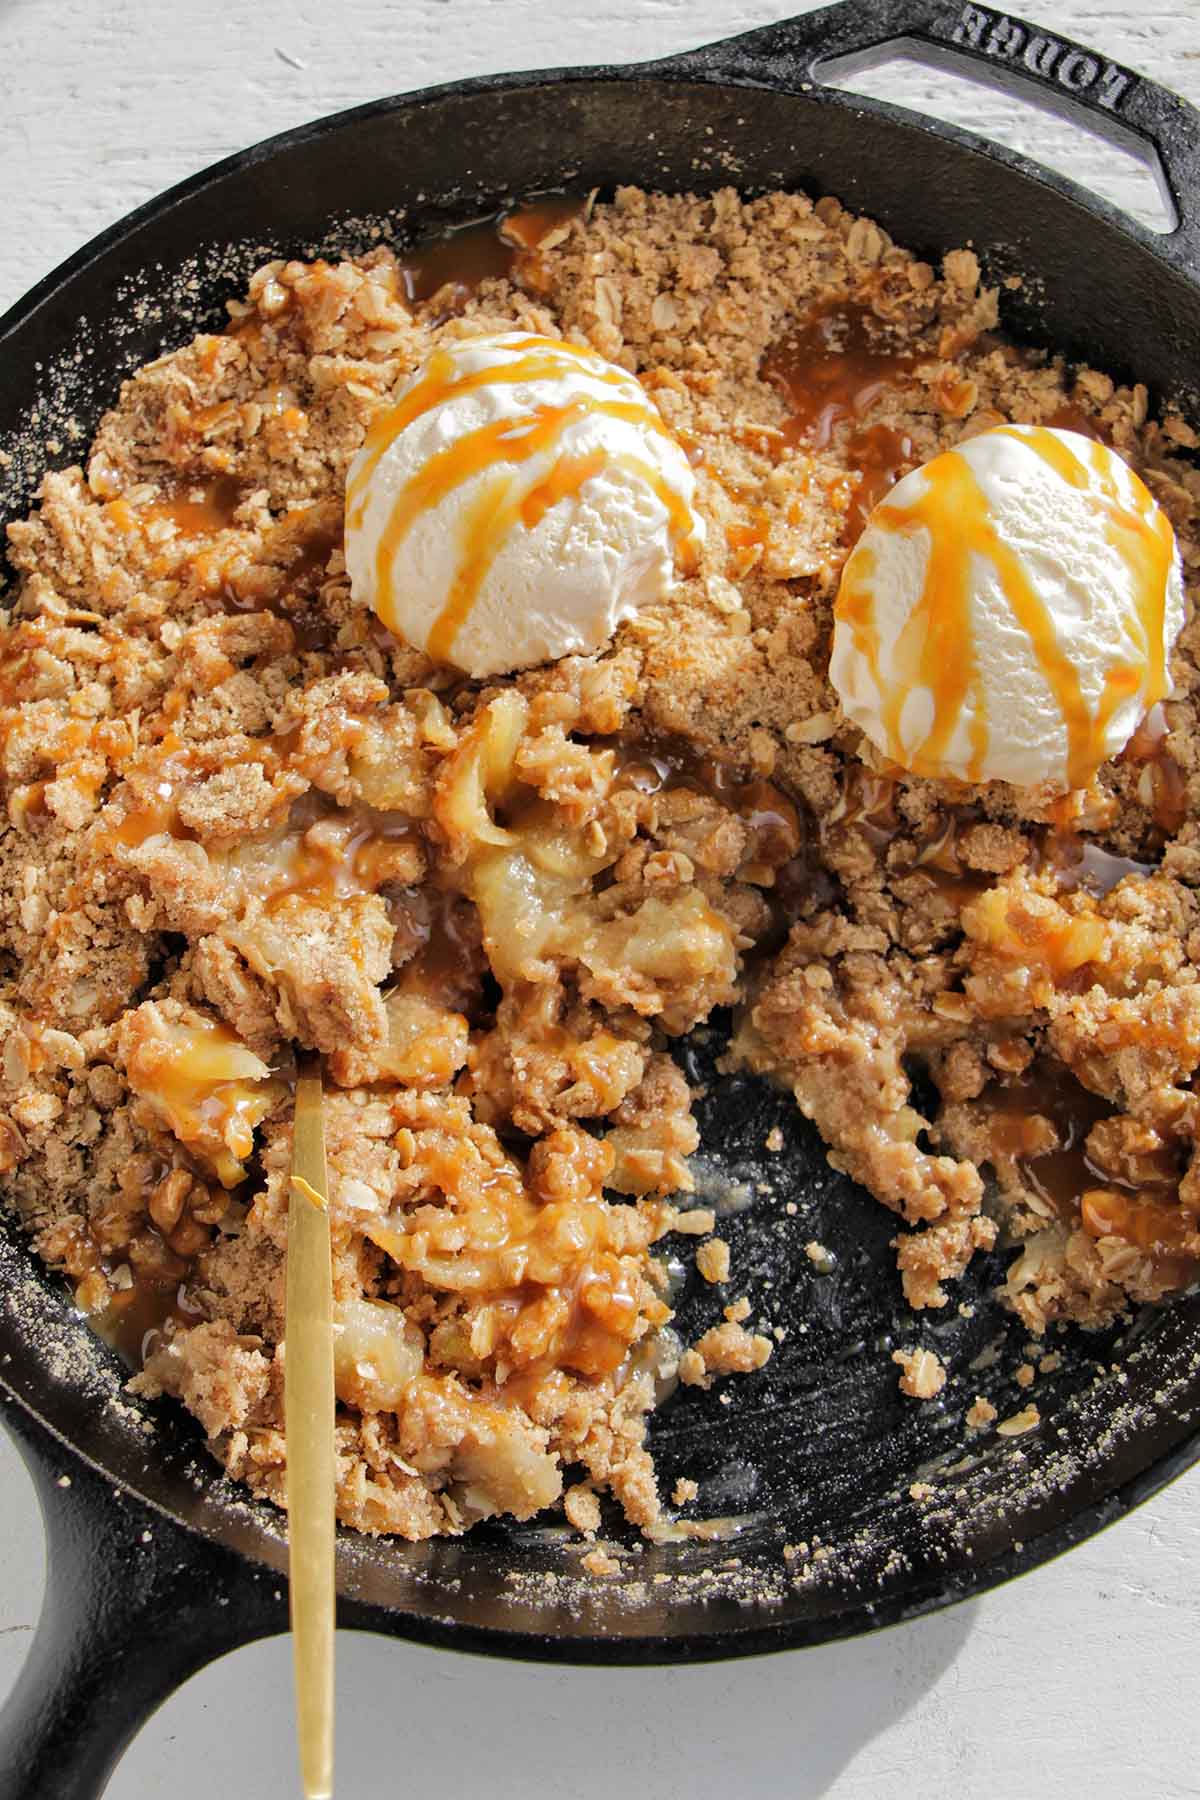 apple crisp topped with caramel and vanilla ice cream scoops.